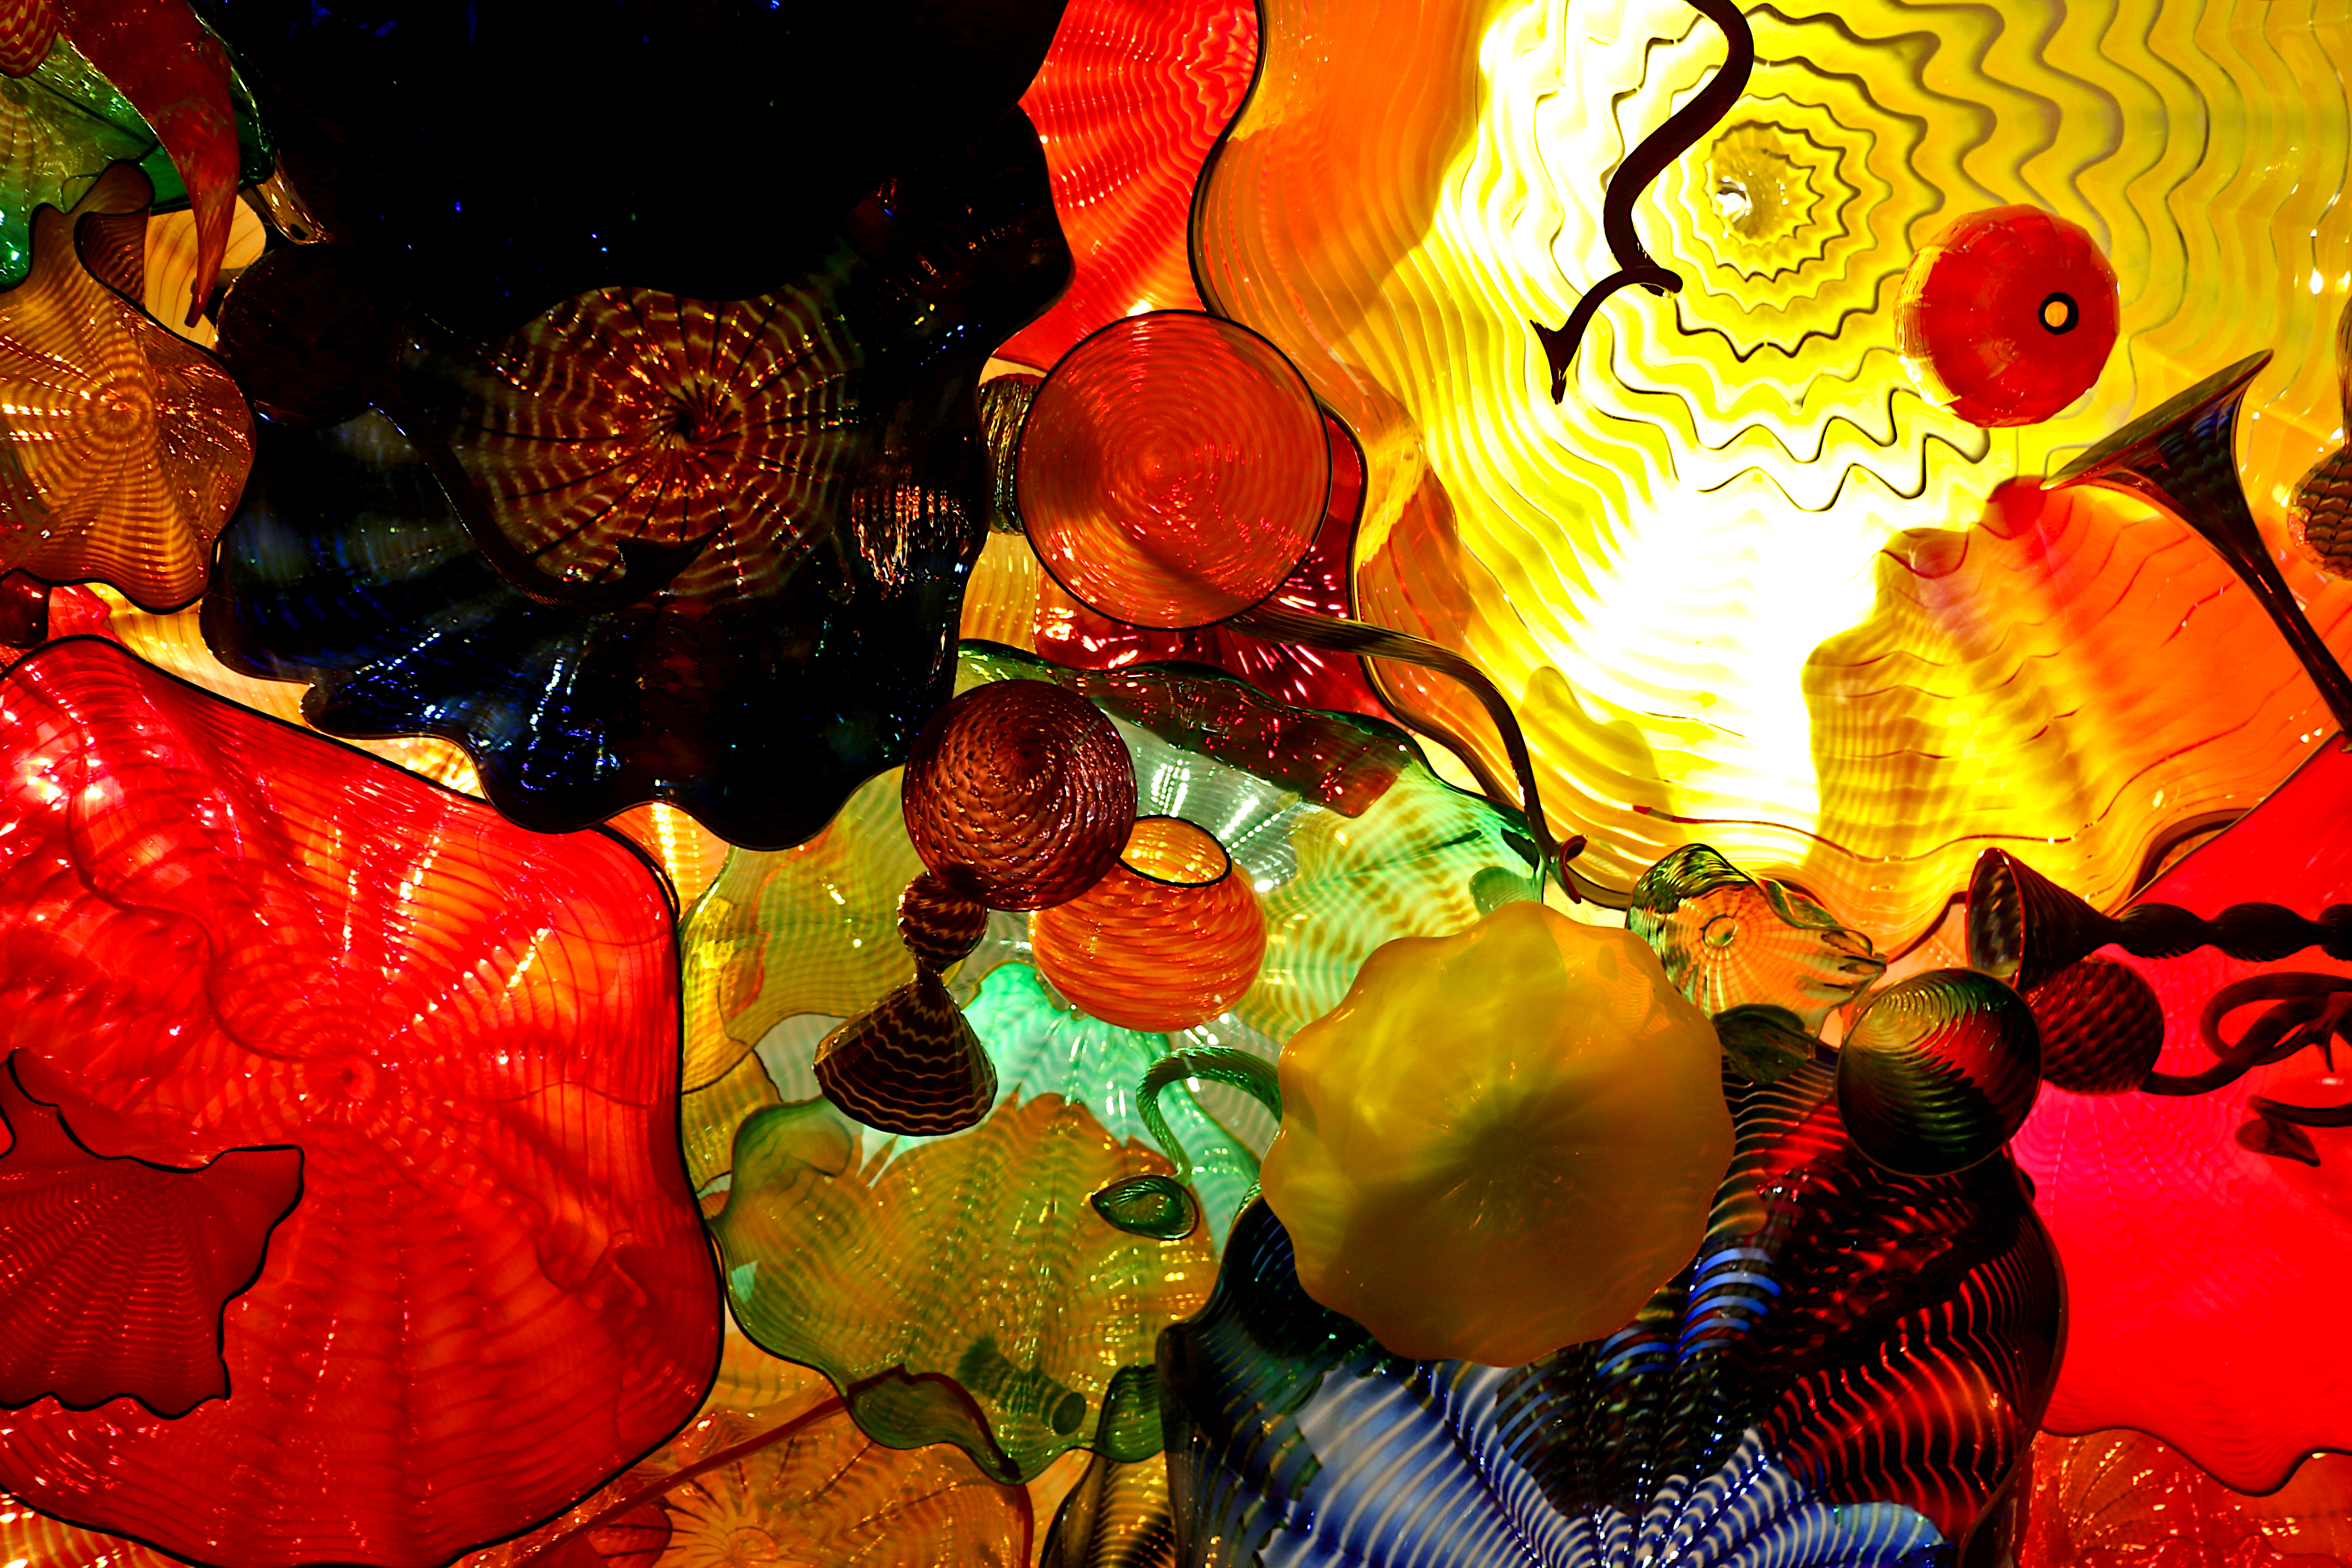 Experience the Best Things to Do in Seattle with Your Family - Chihuly Garden and Glass